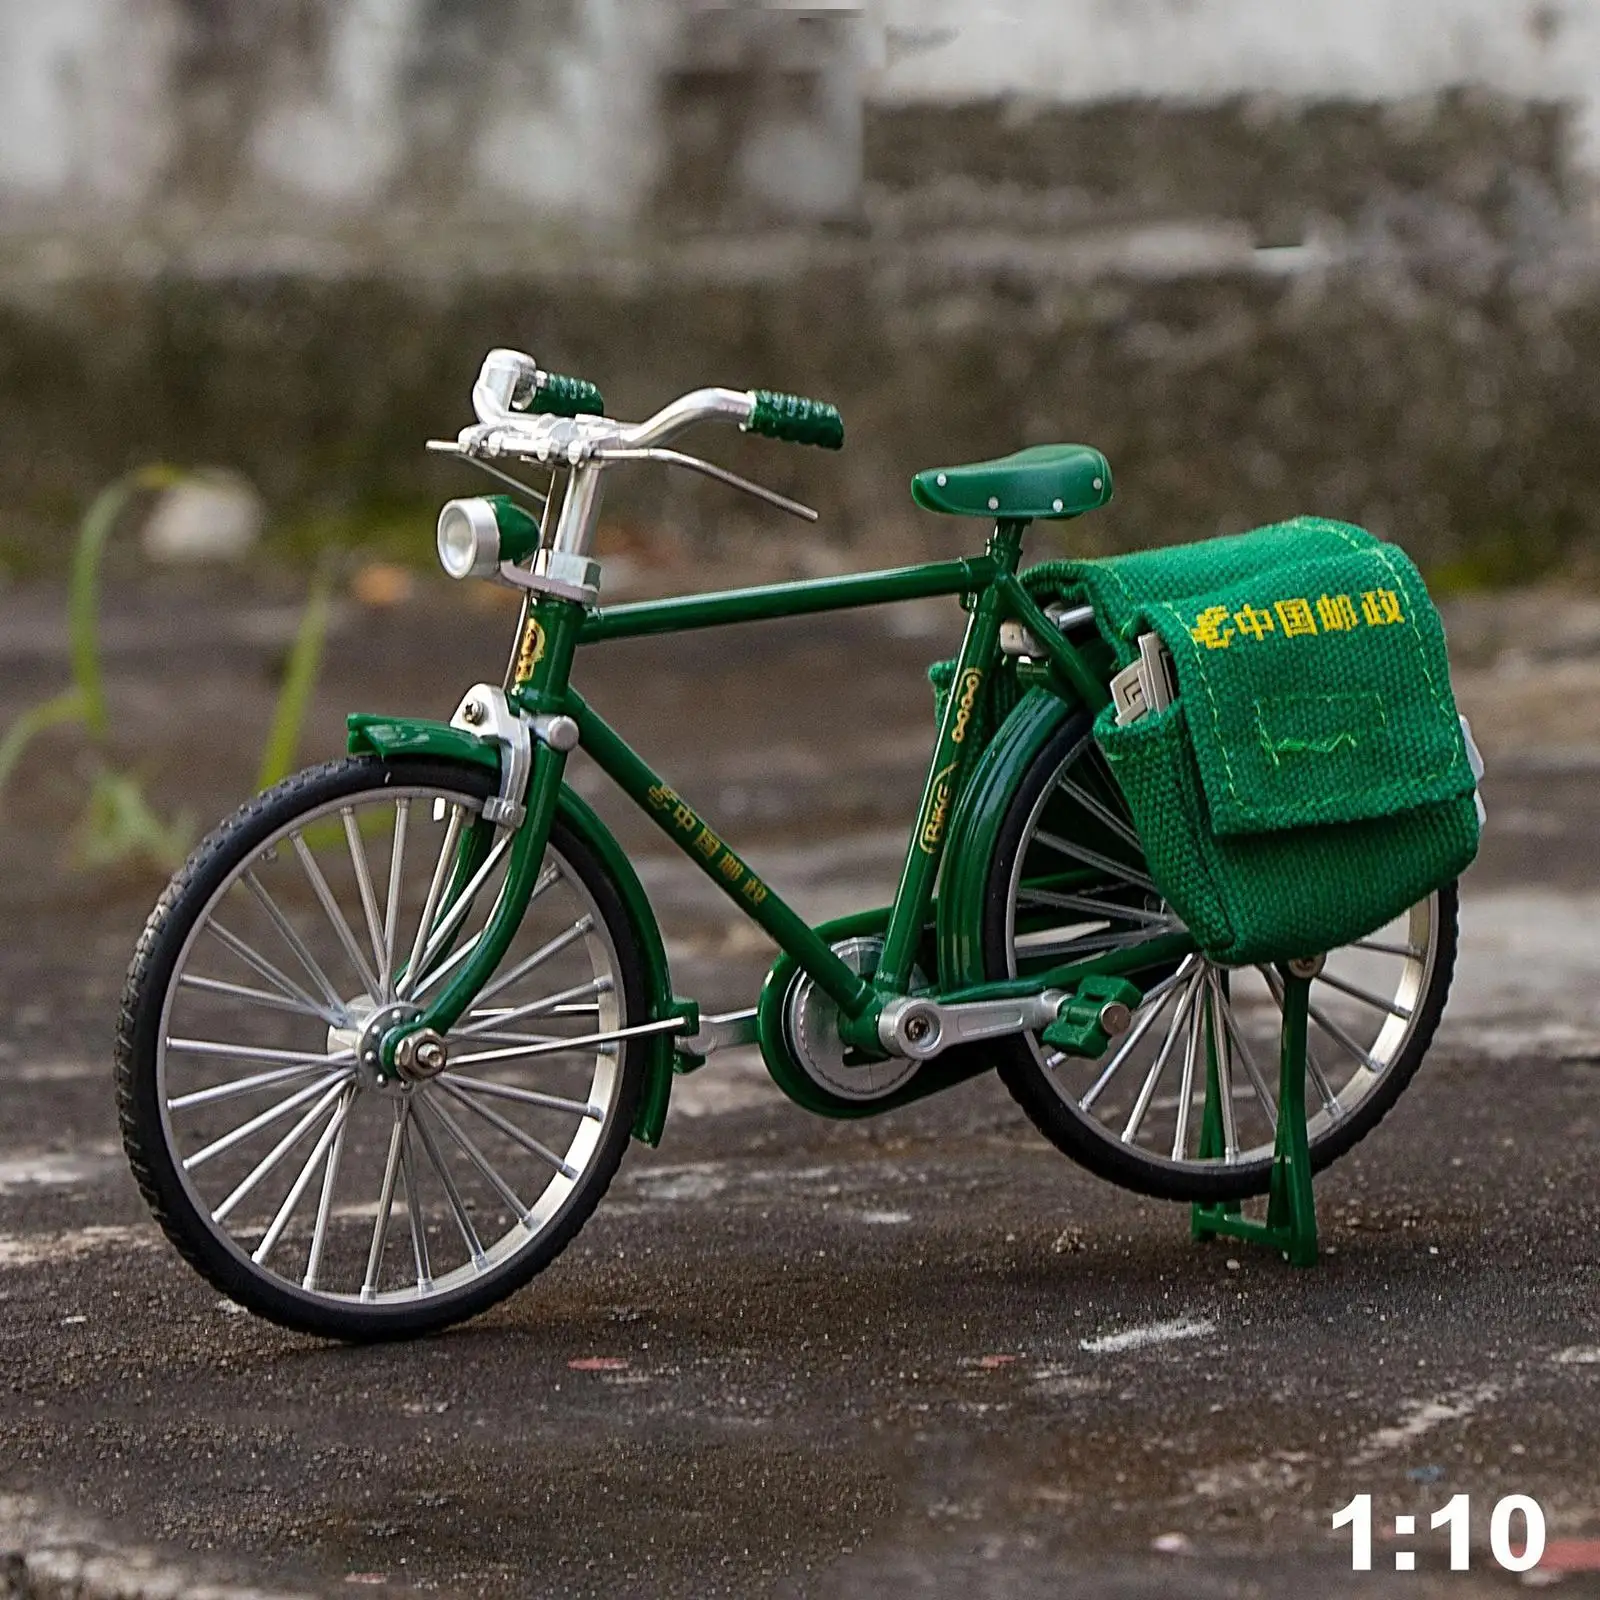 1:10 Bicycle Model Retro Style Ornaments Sculpture Miniature Handicraft Creative China Post Bike Toy for Children Girls Boys